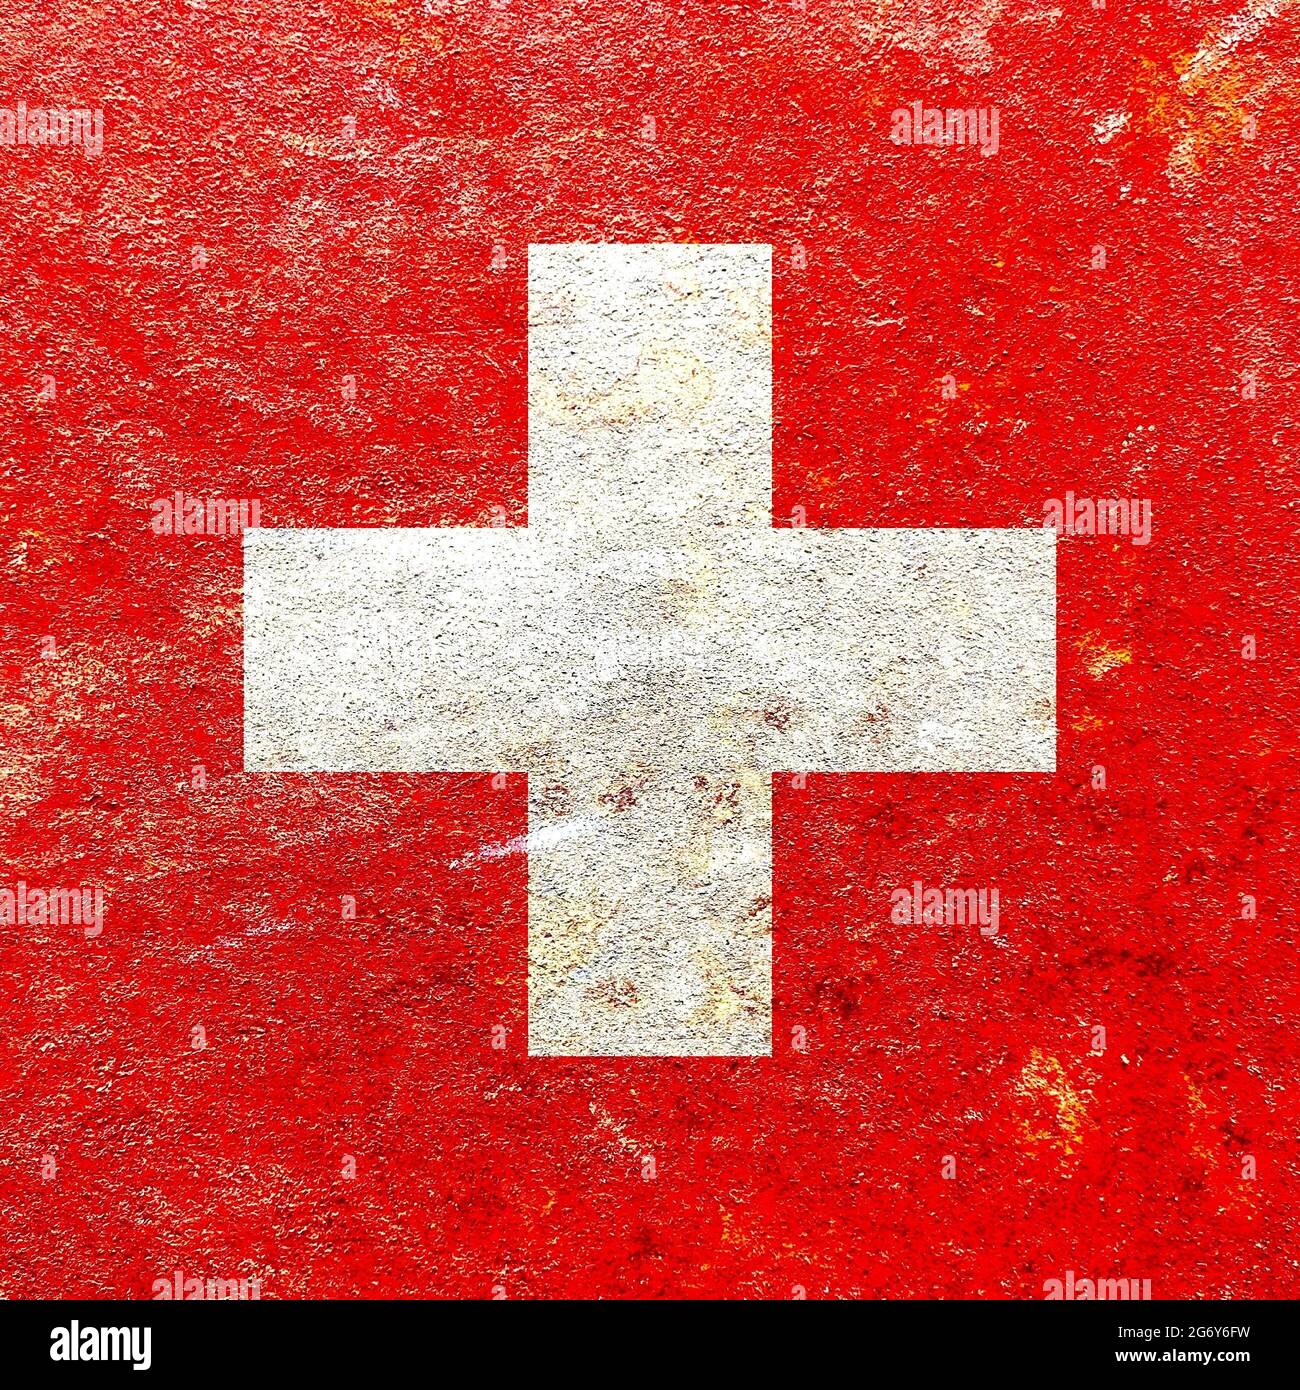 Grunge Switzerland flag pattern on a rusty mottled iron wall background, faded old glory concept Stock Photo